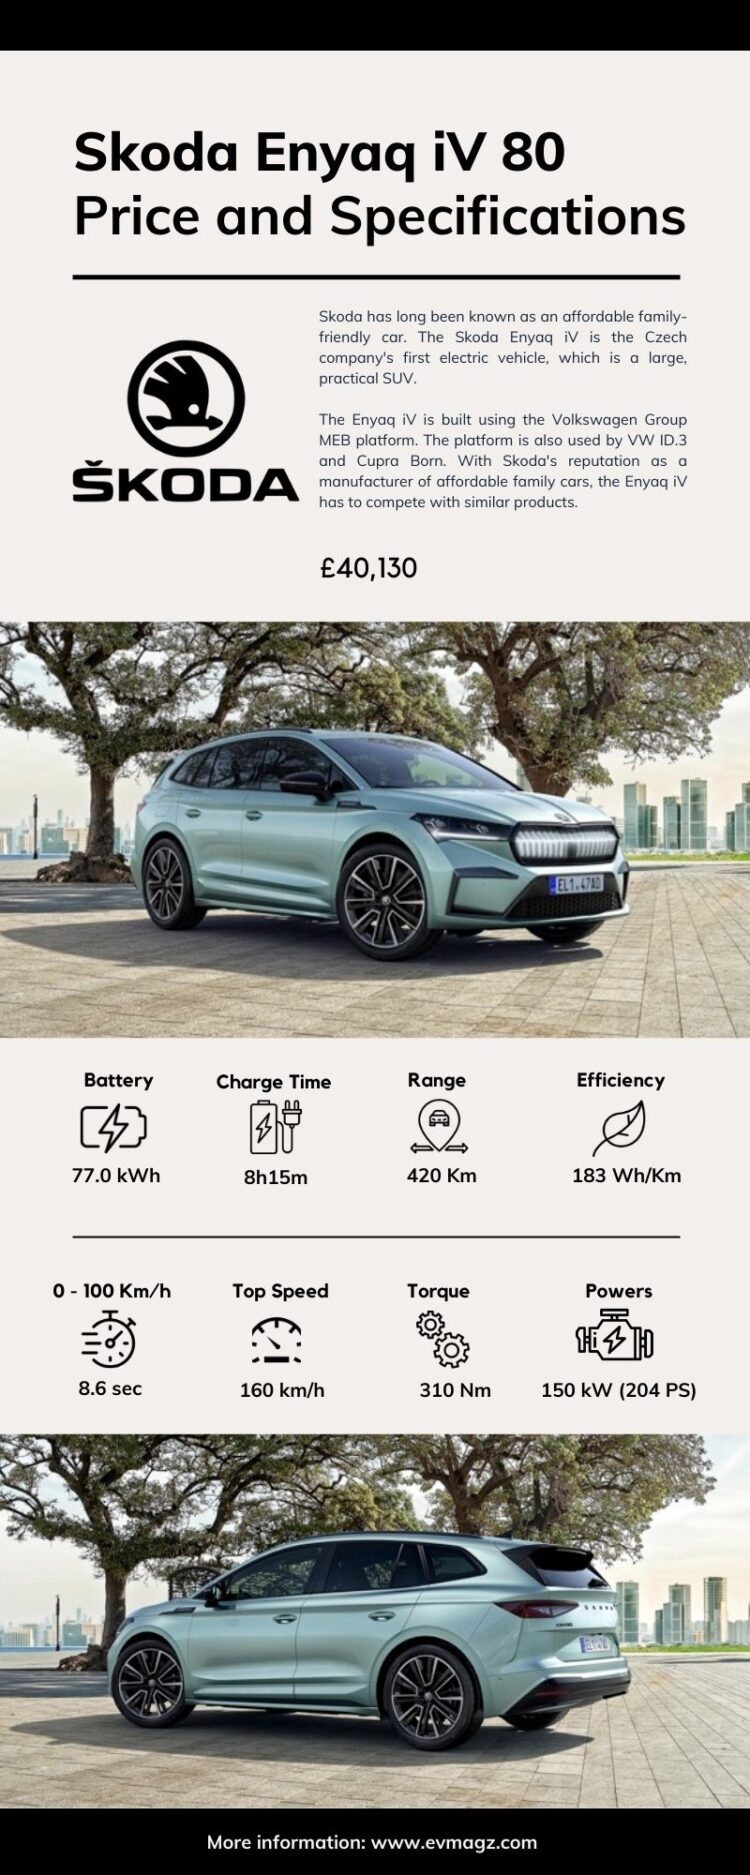 Skoda Enyaq iV 80 Price and Specifications Infographic 750x1875 - Skoda Enyaq iV 80 Price and Specifications [Infographic]